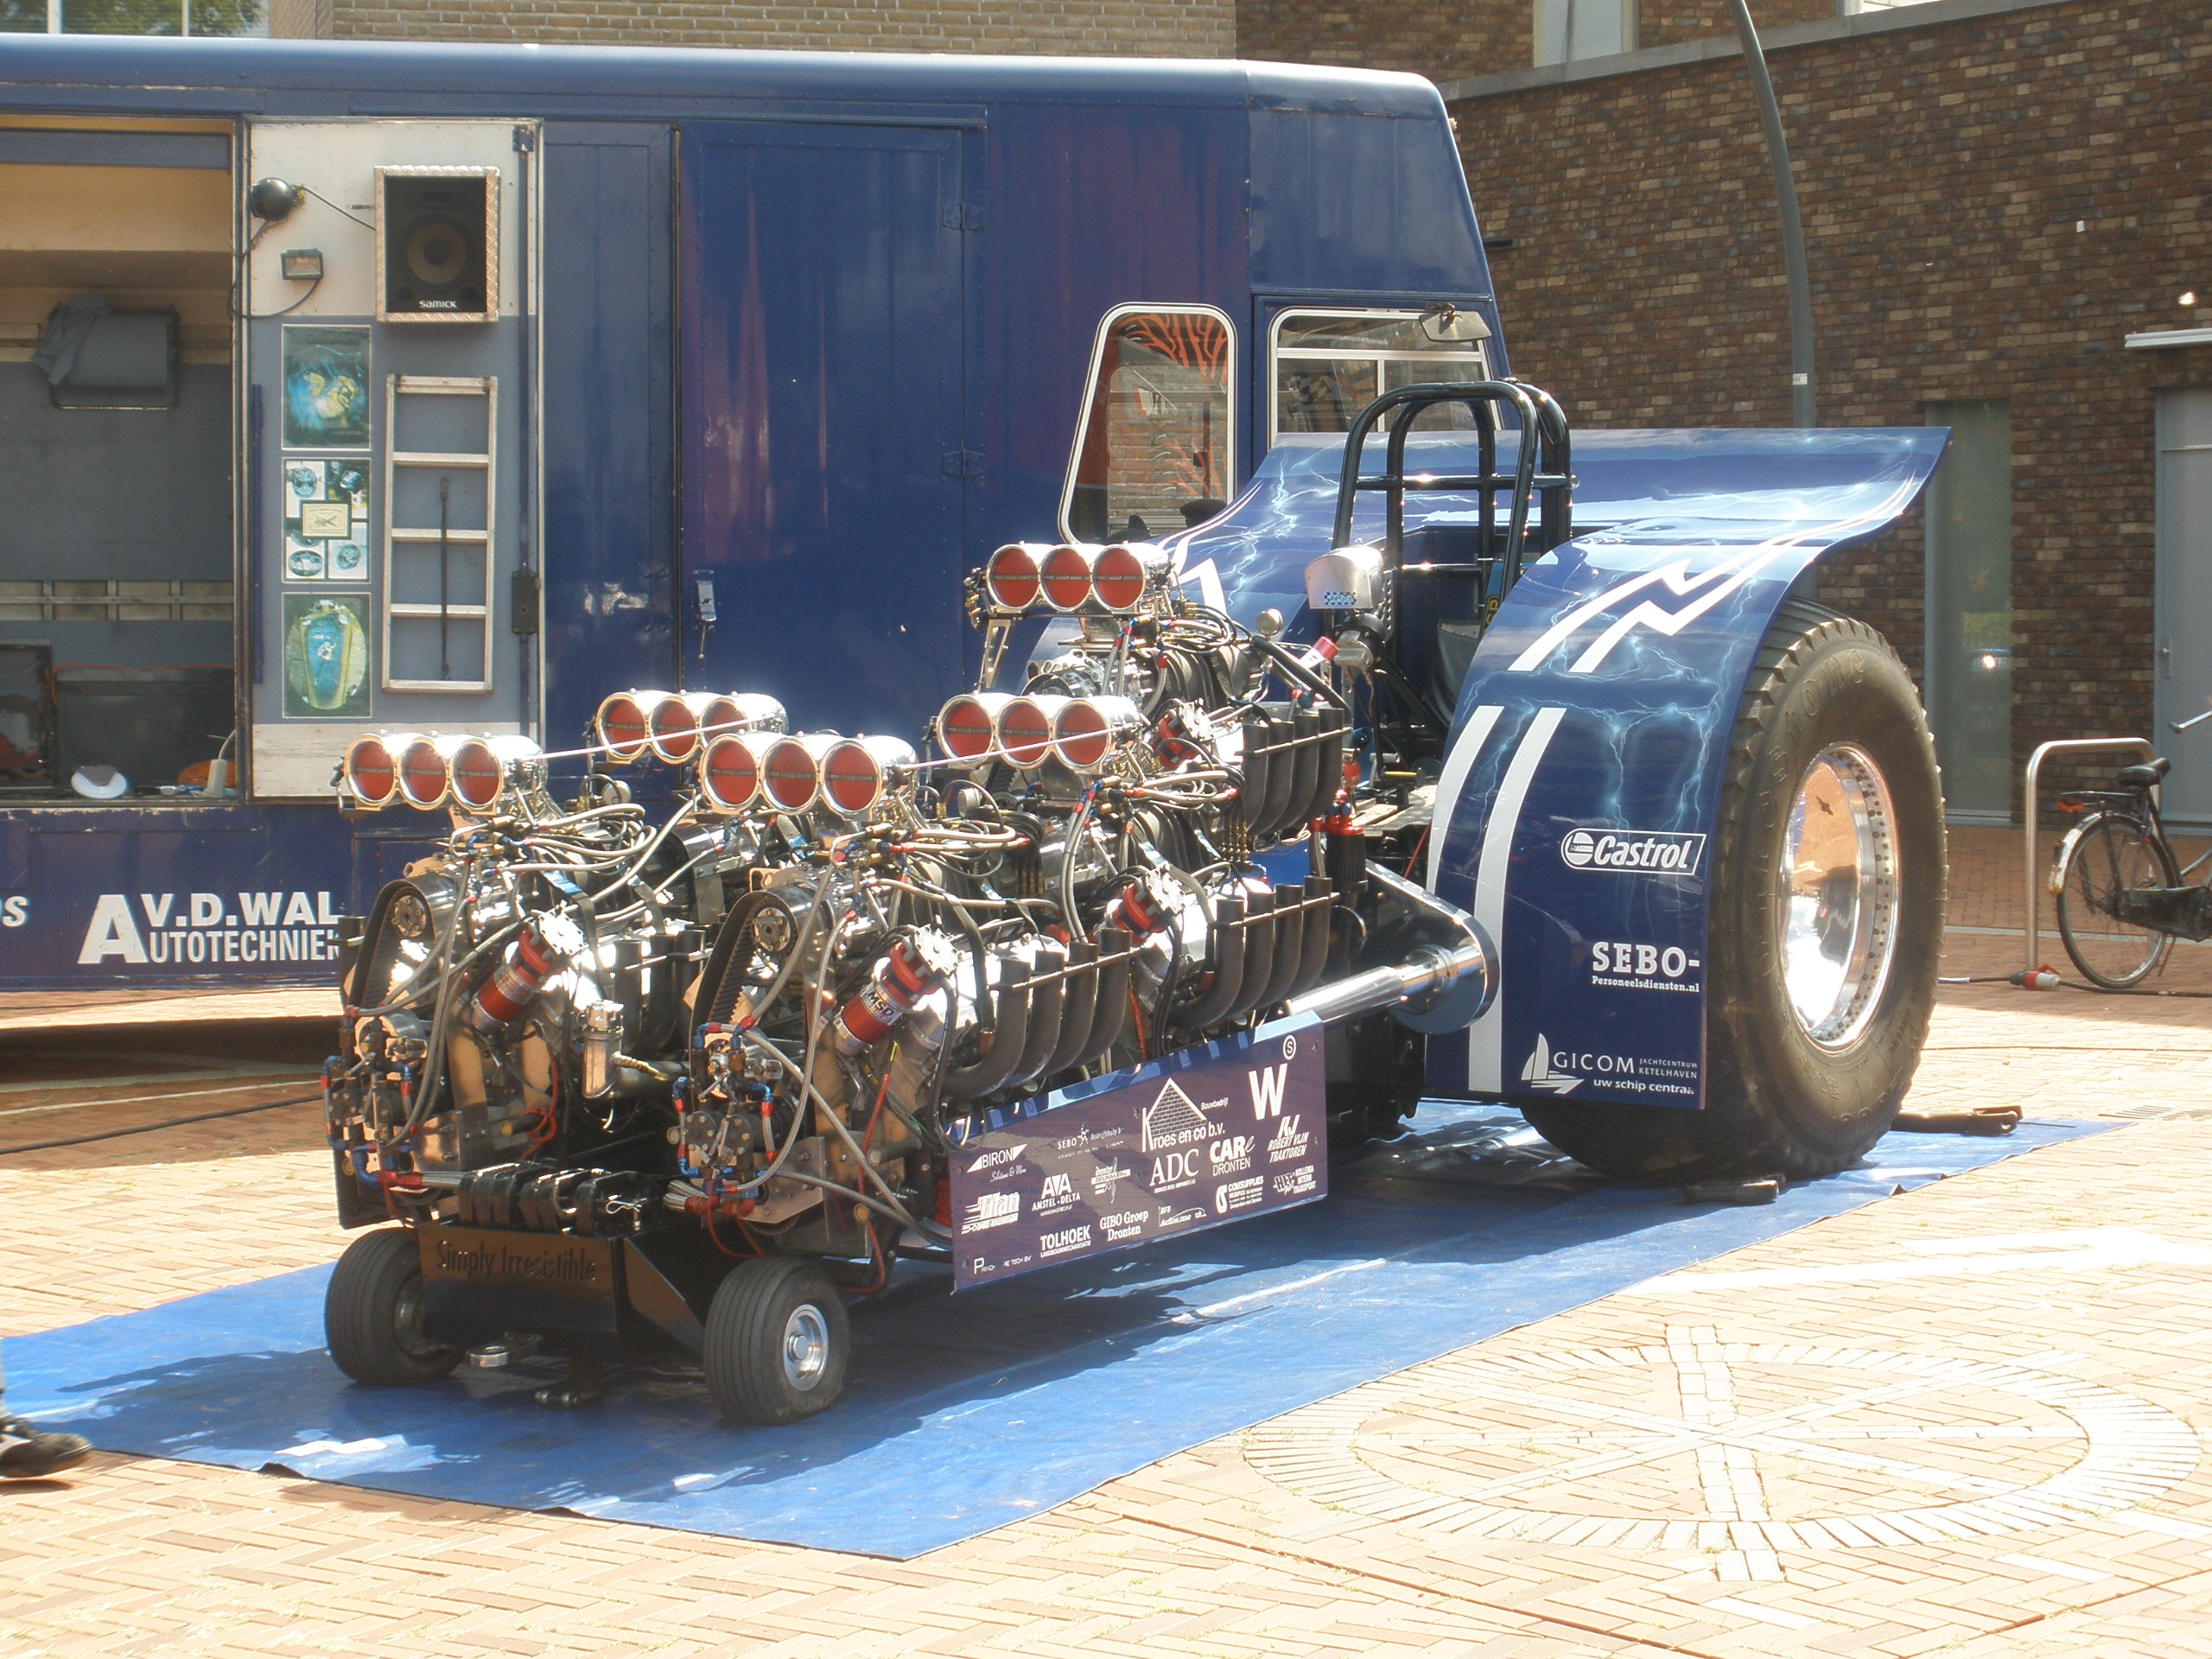 TRACTOR PULLING race racing hot rod rods tractor engine r wallpaper 2560x1920